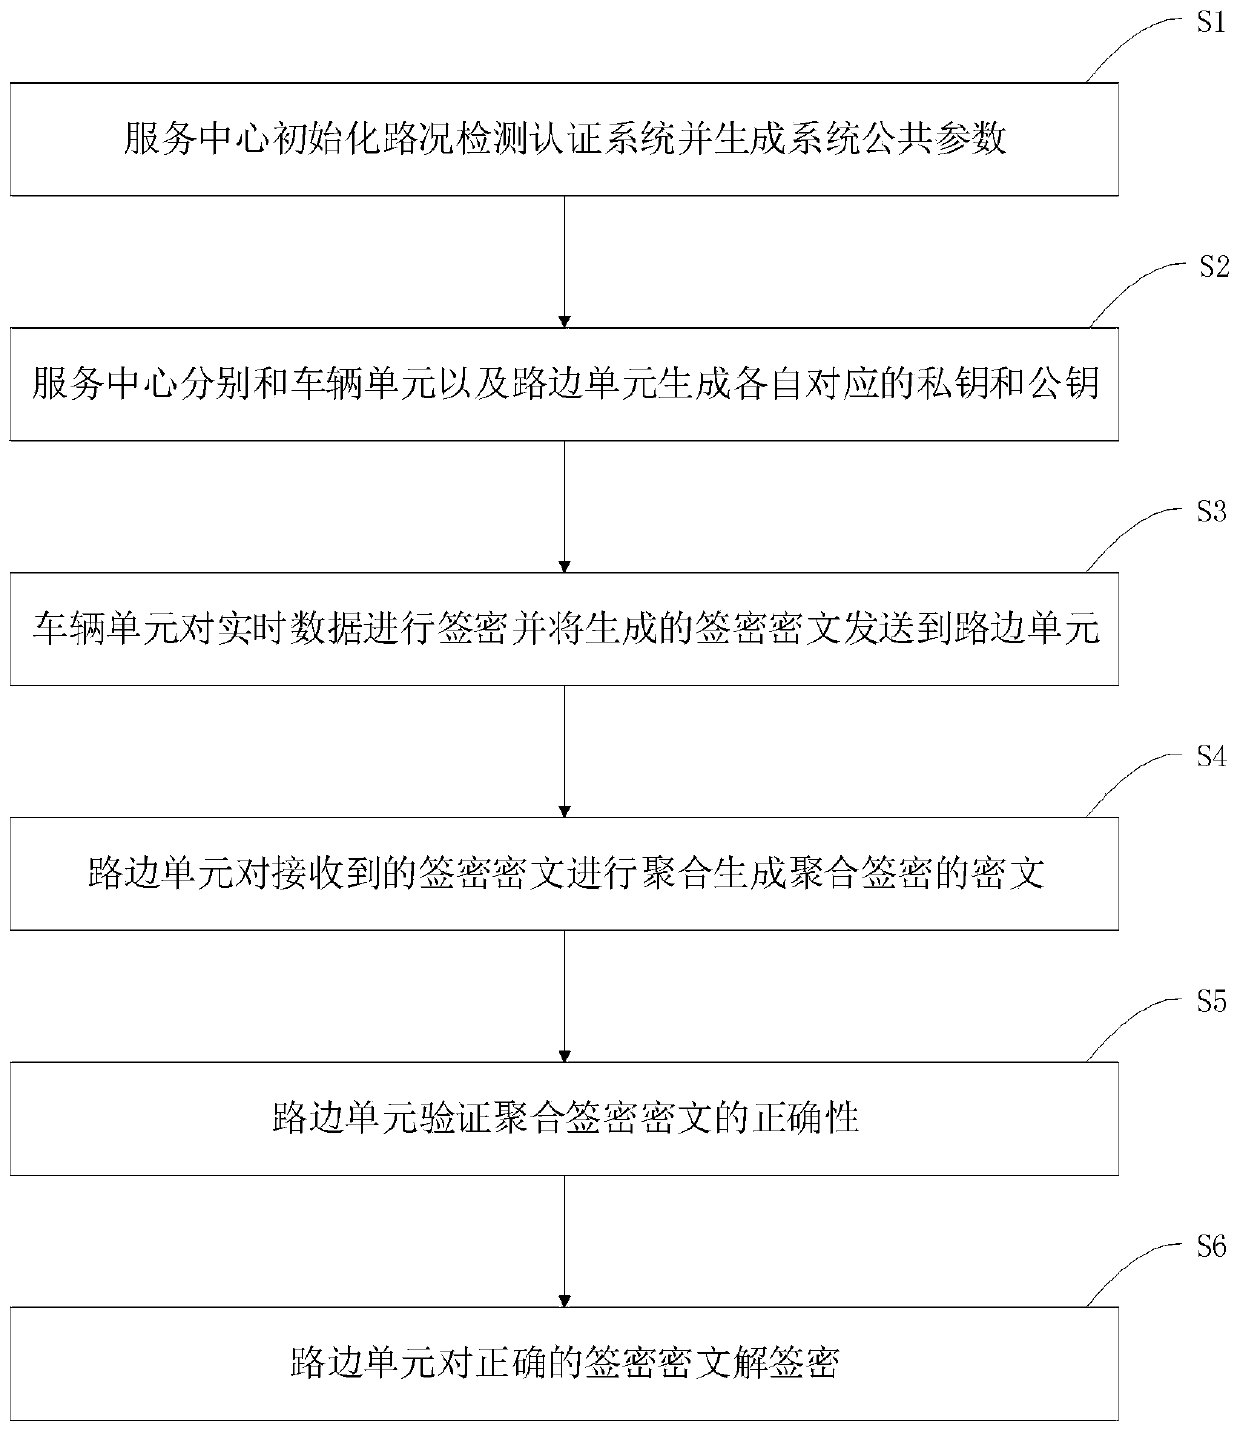 Fog-based road condition detection and authentication system and method